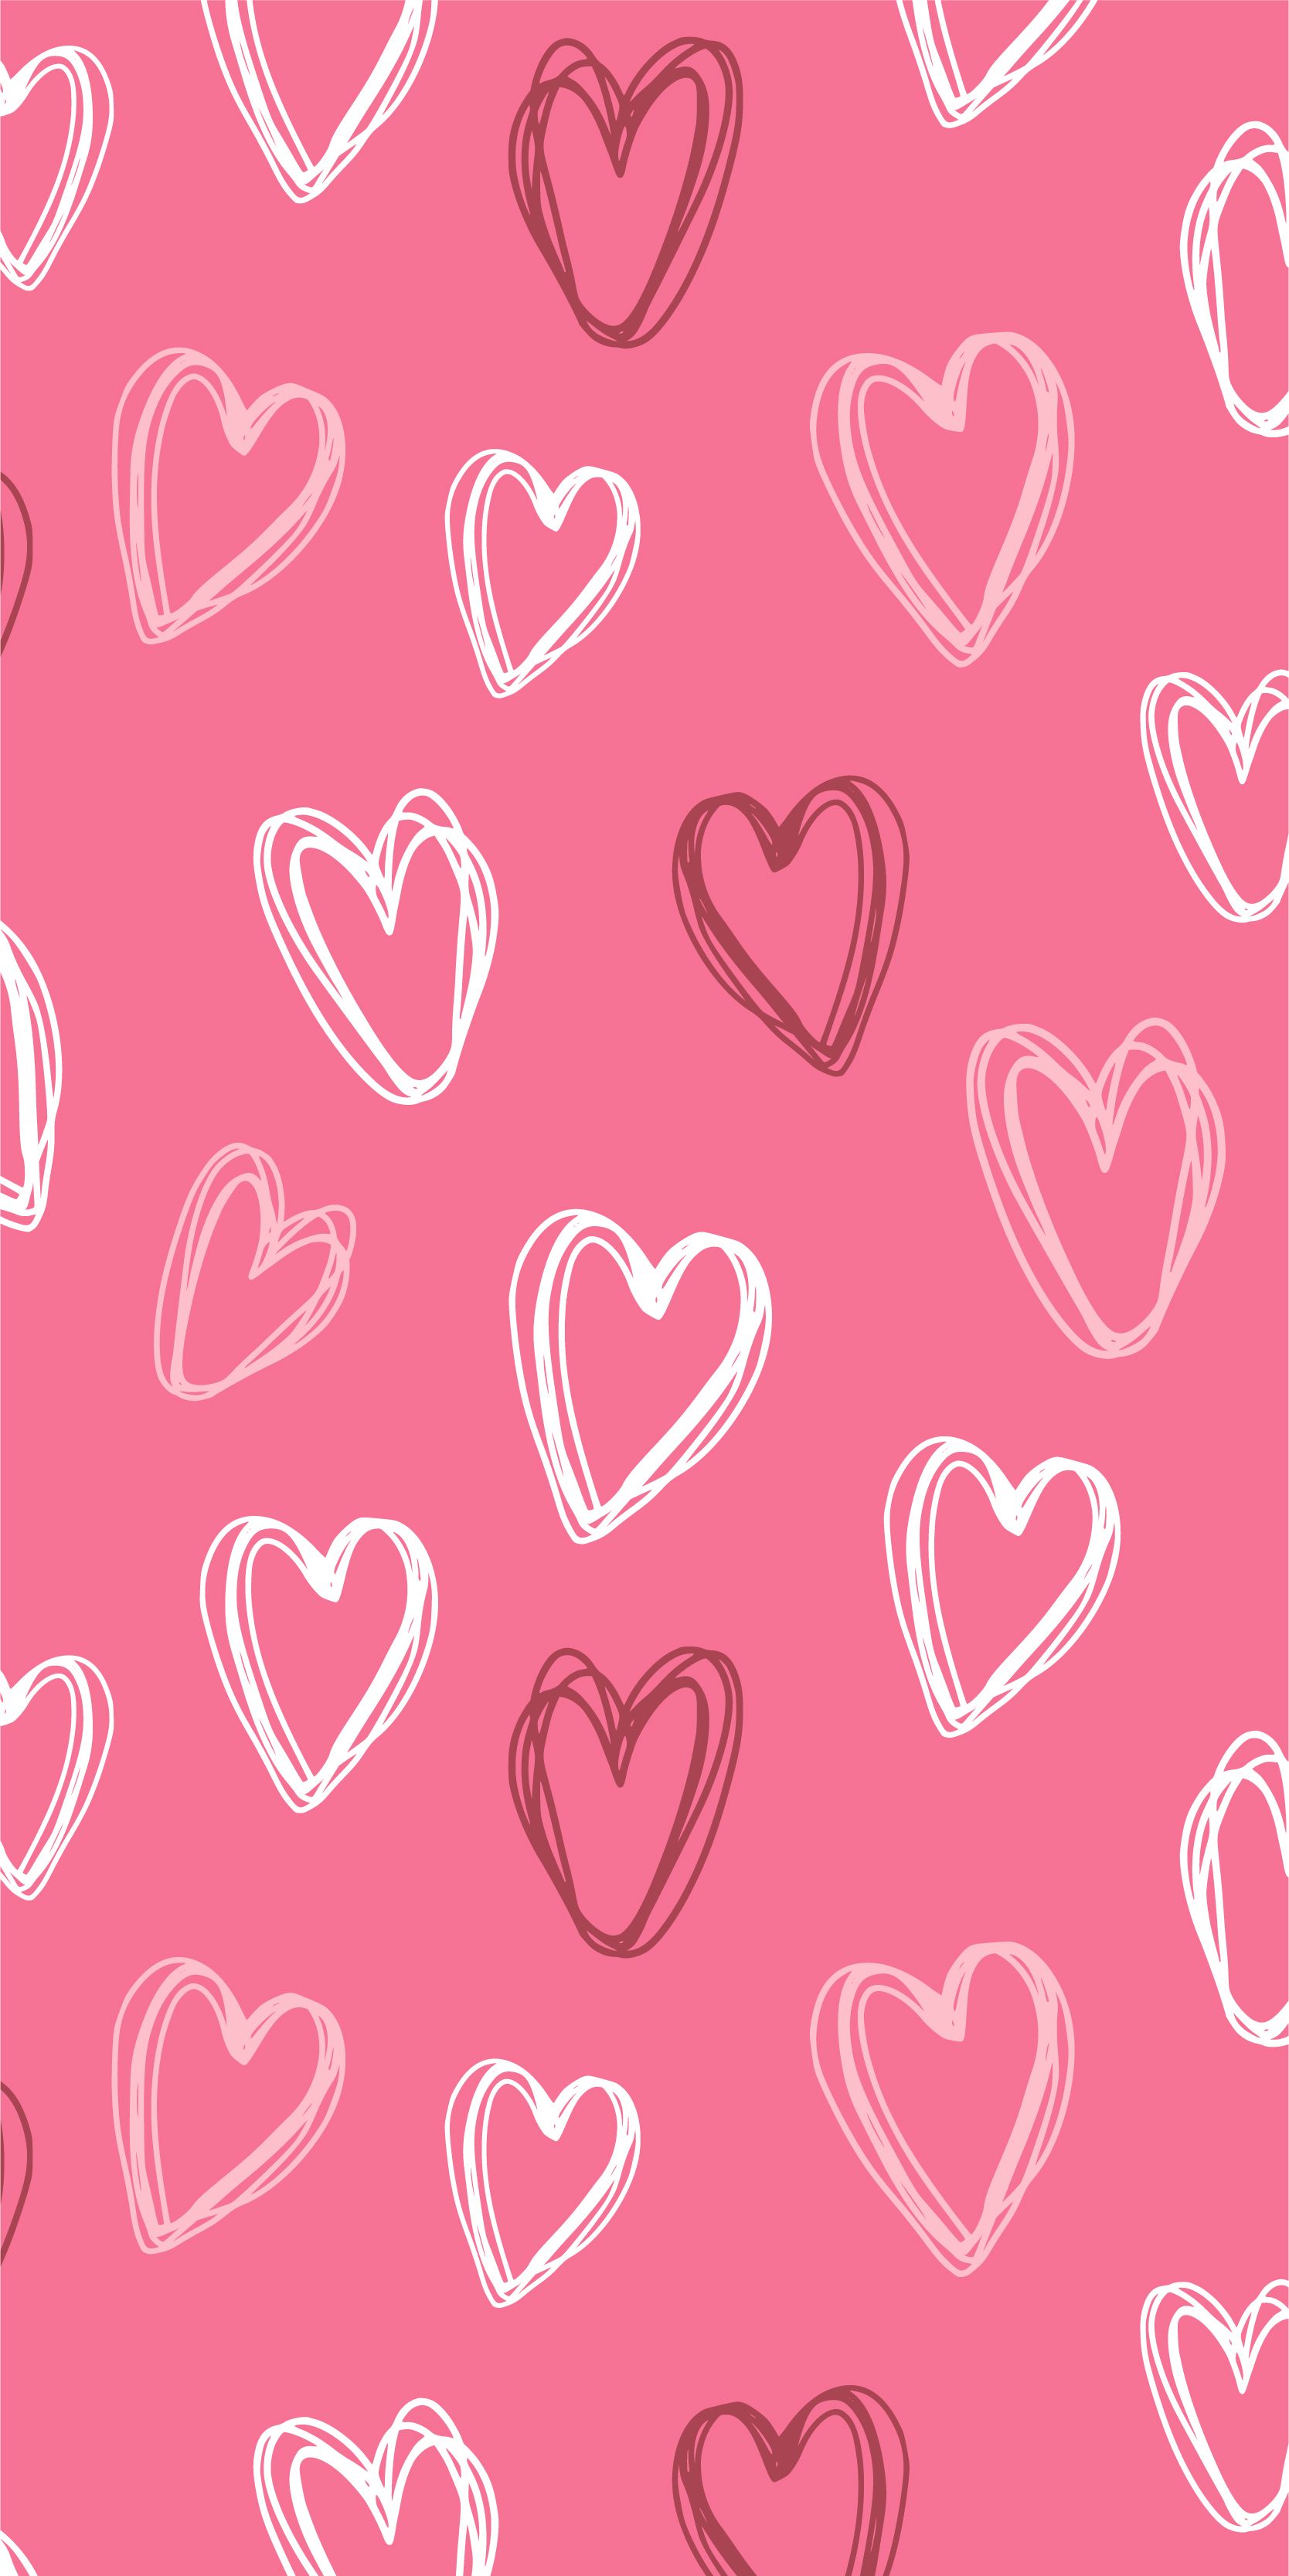 Pattern wallpaper for Valentines Day and wedding. Valentines wallpaper iphone, Valentines wallpaper, Cute patterns wallpaper